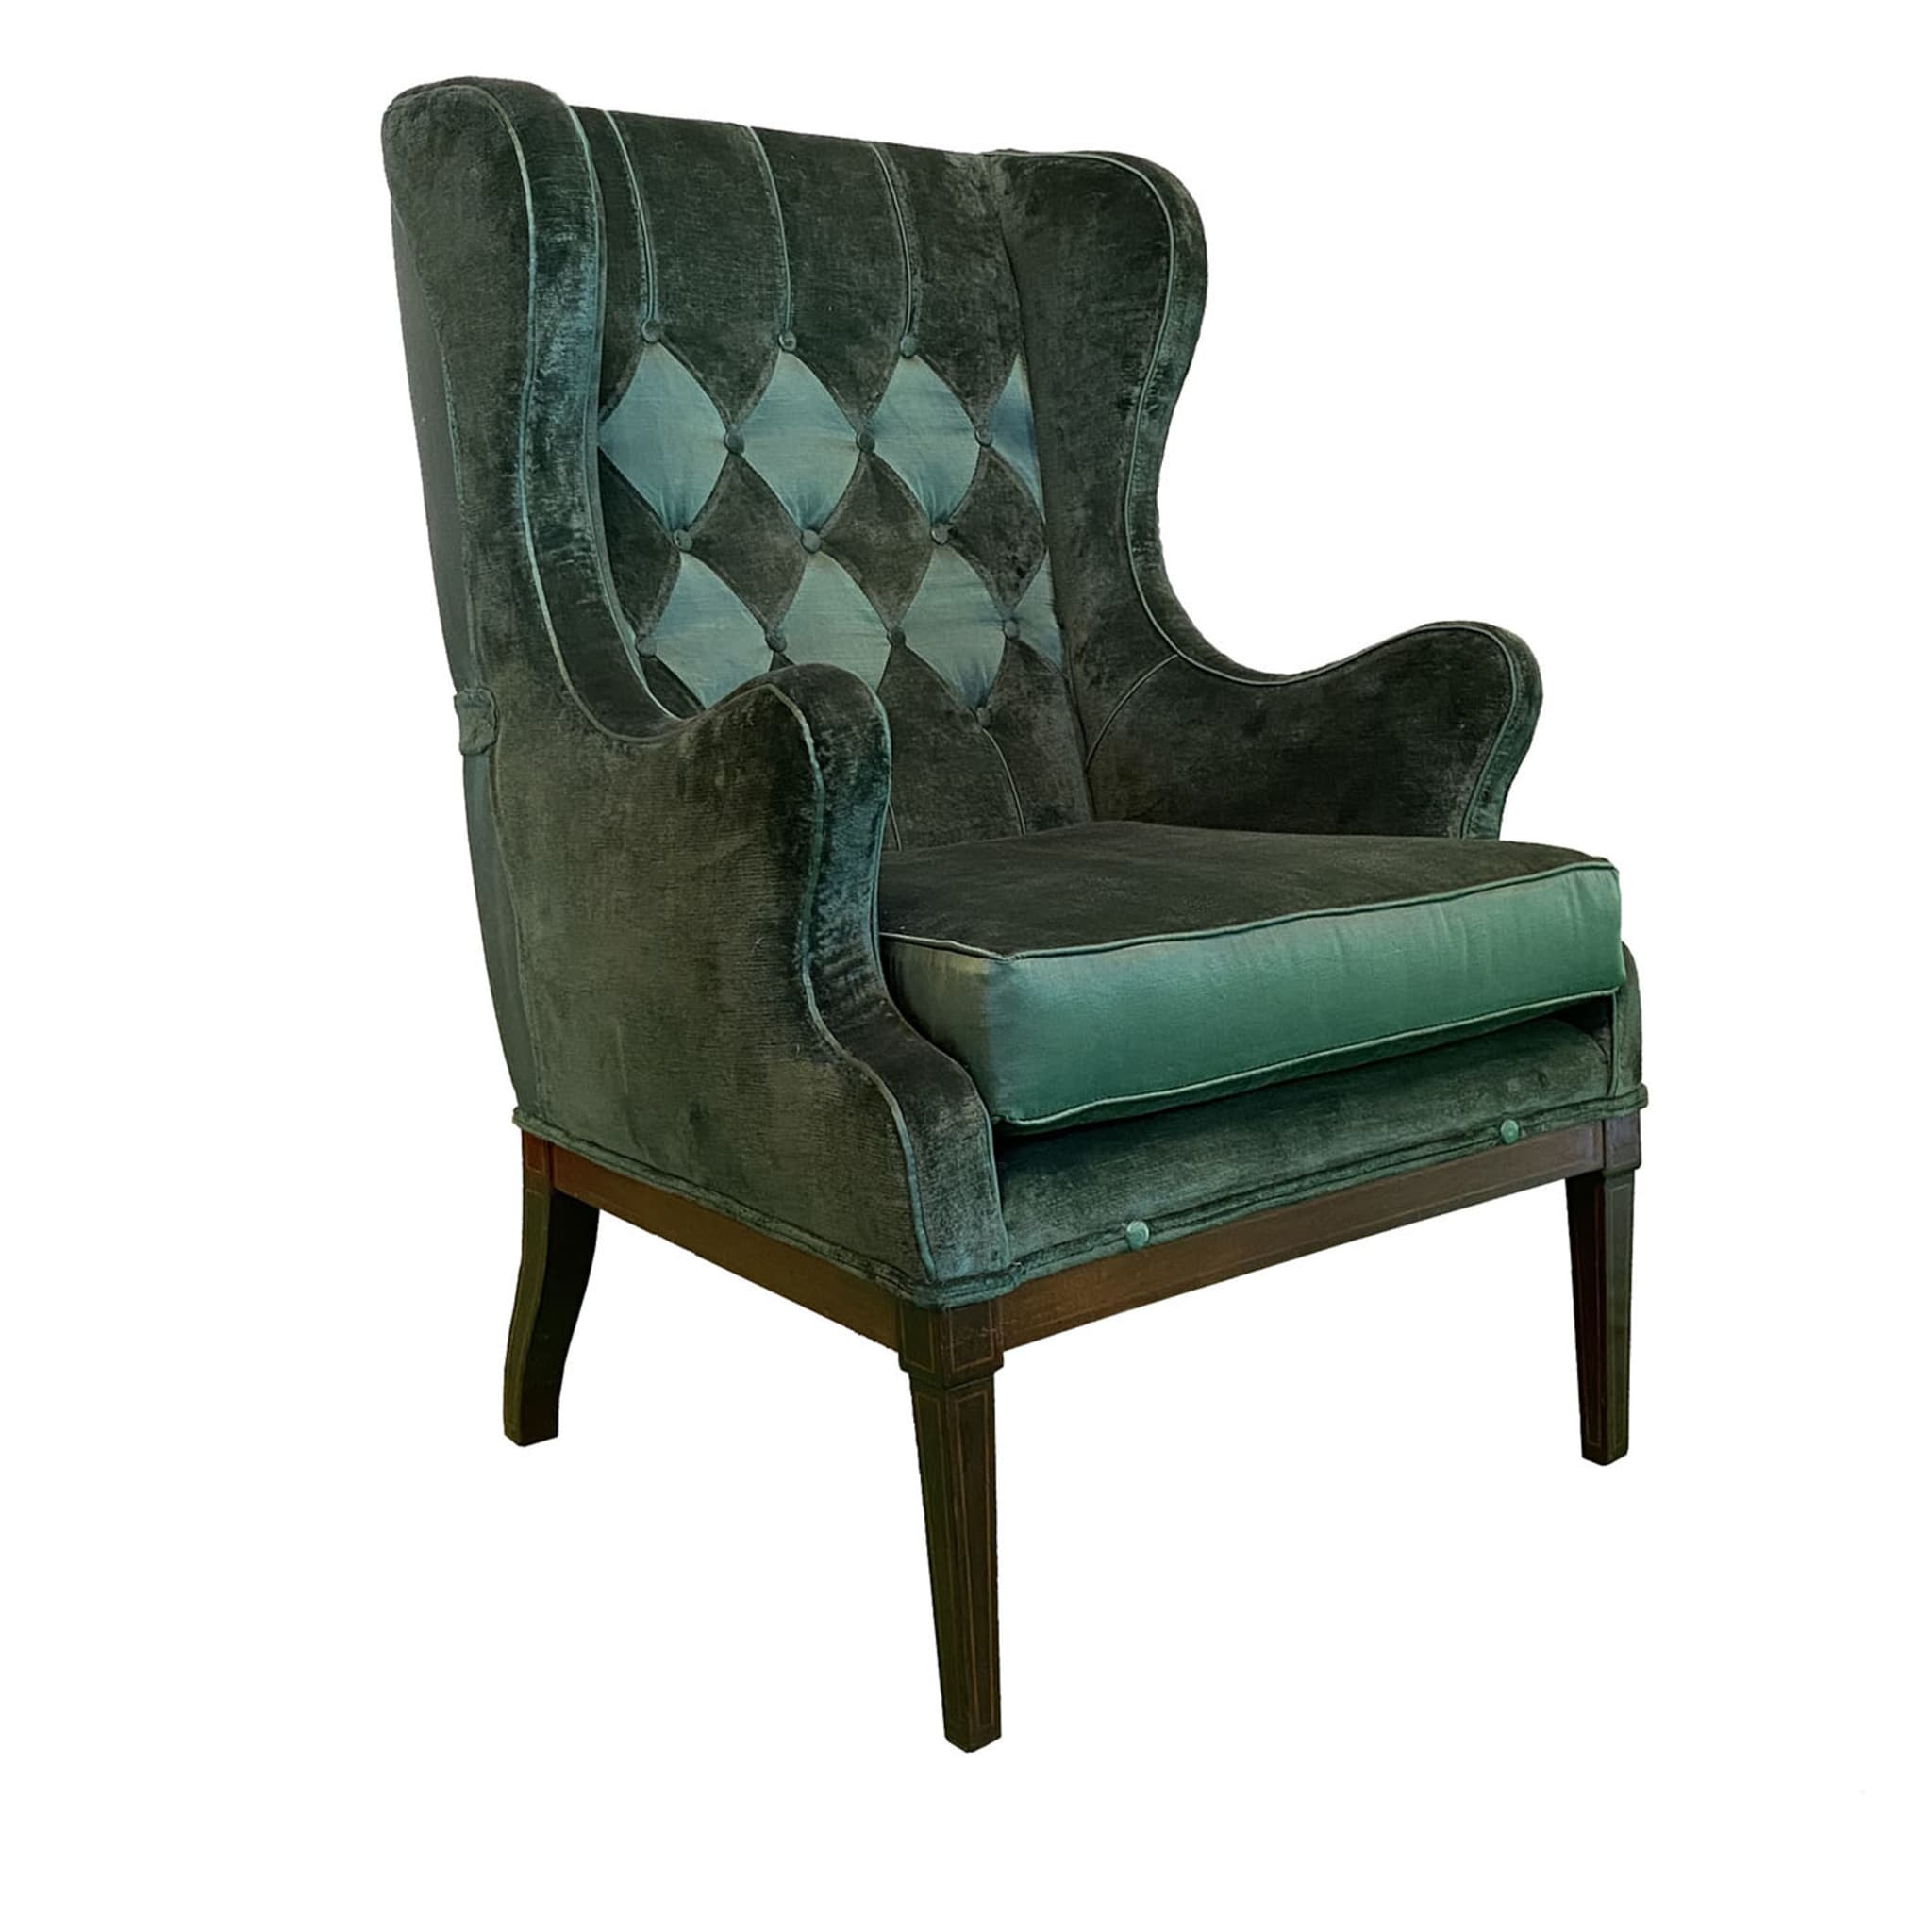 Classic-Style Tufted Green Wingback Armchair - Main view